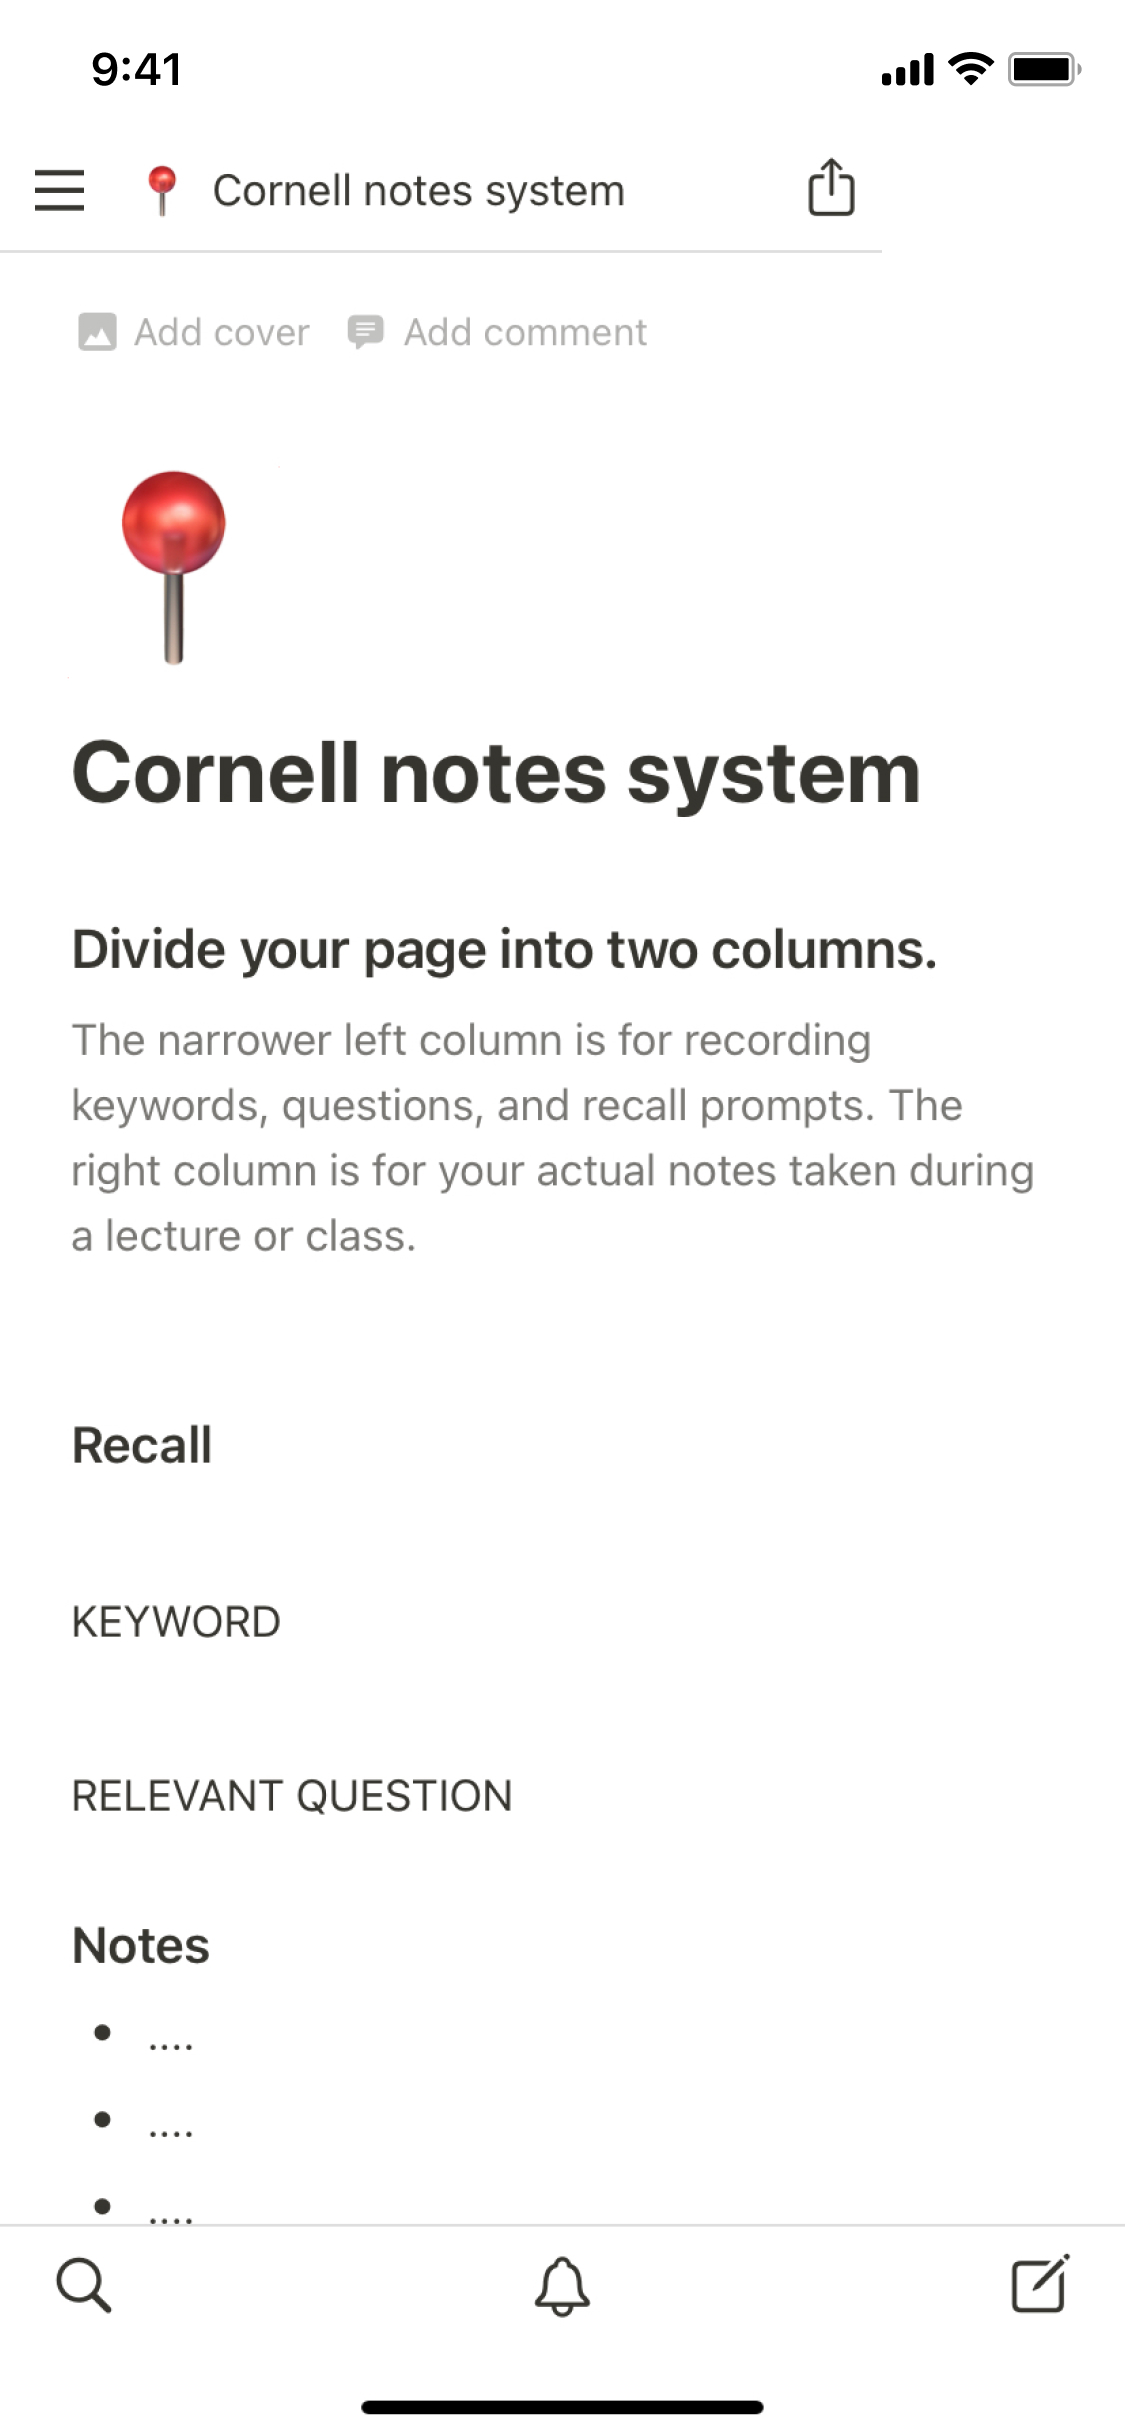 The mobile image for the Cornell notes system template